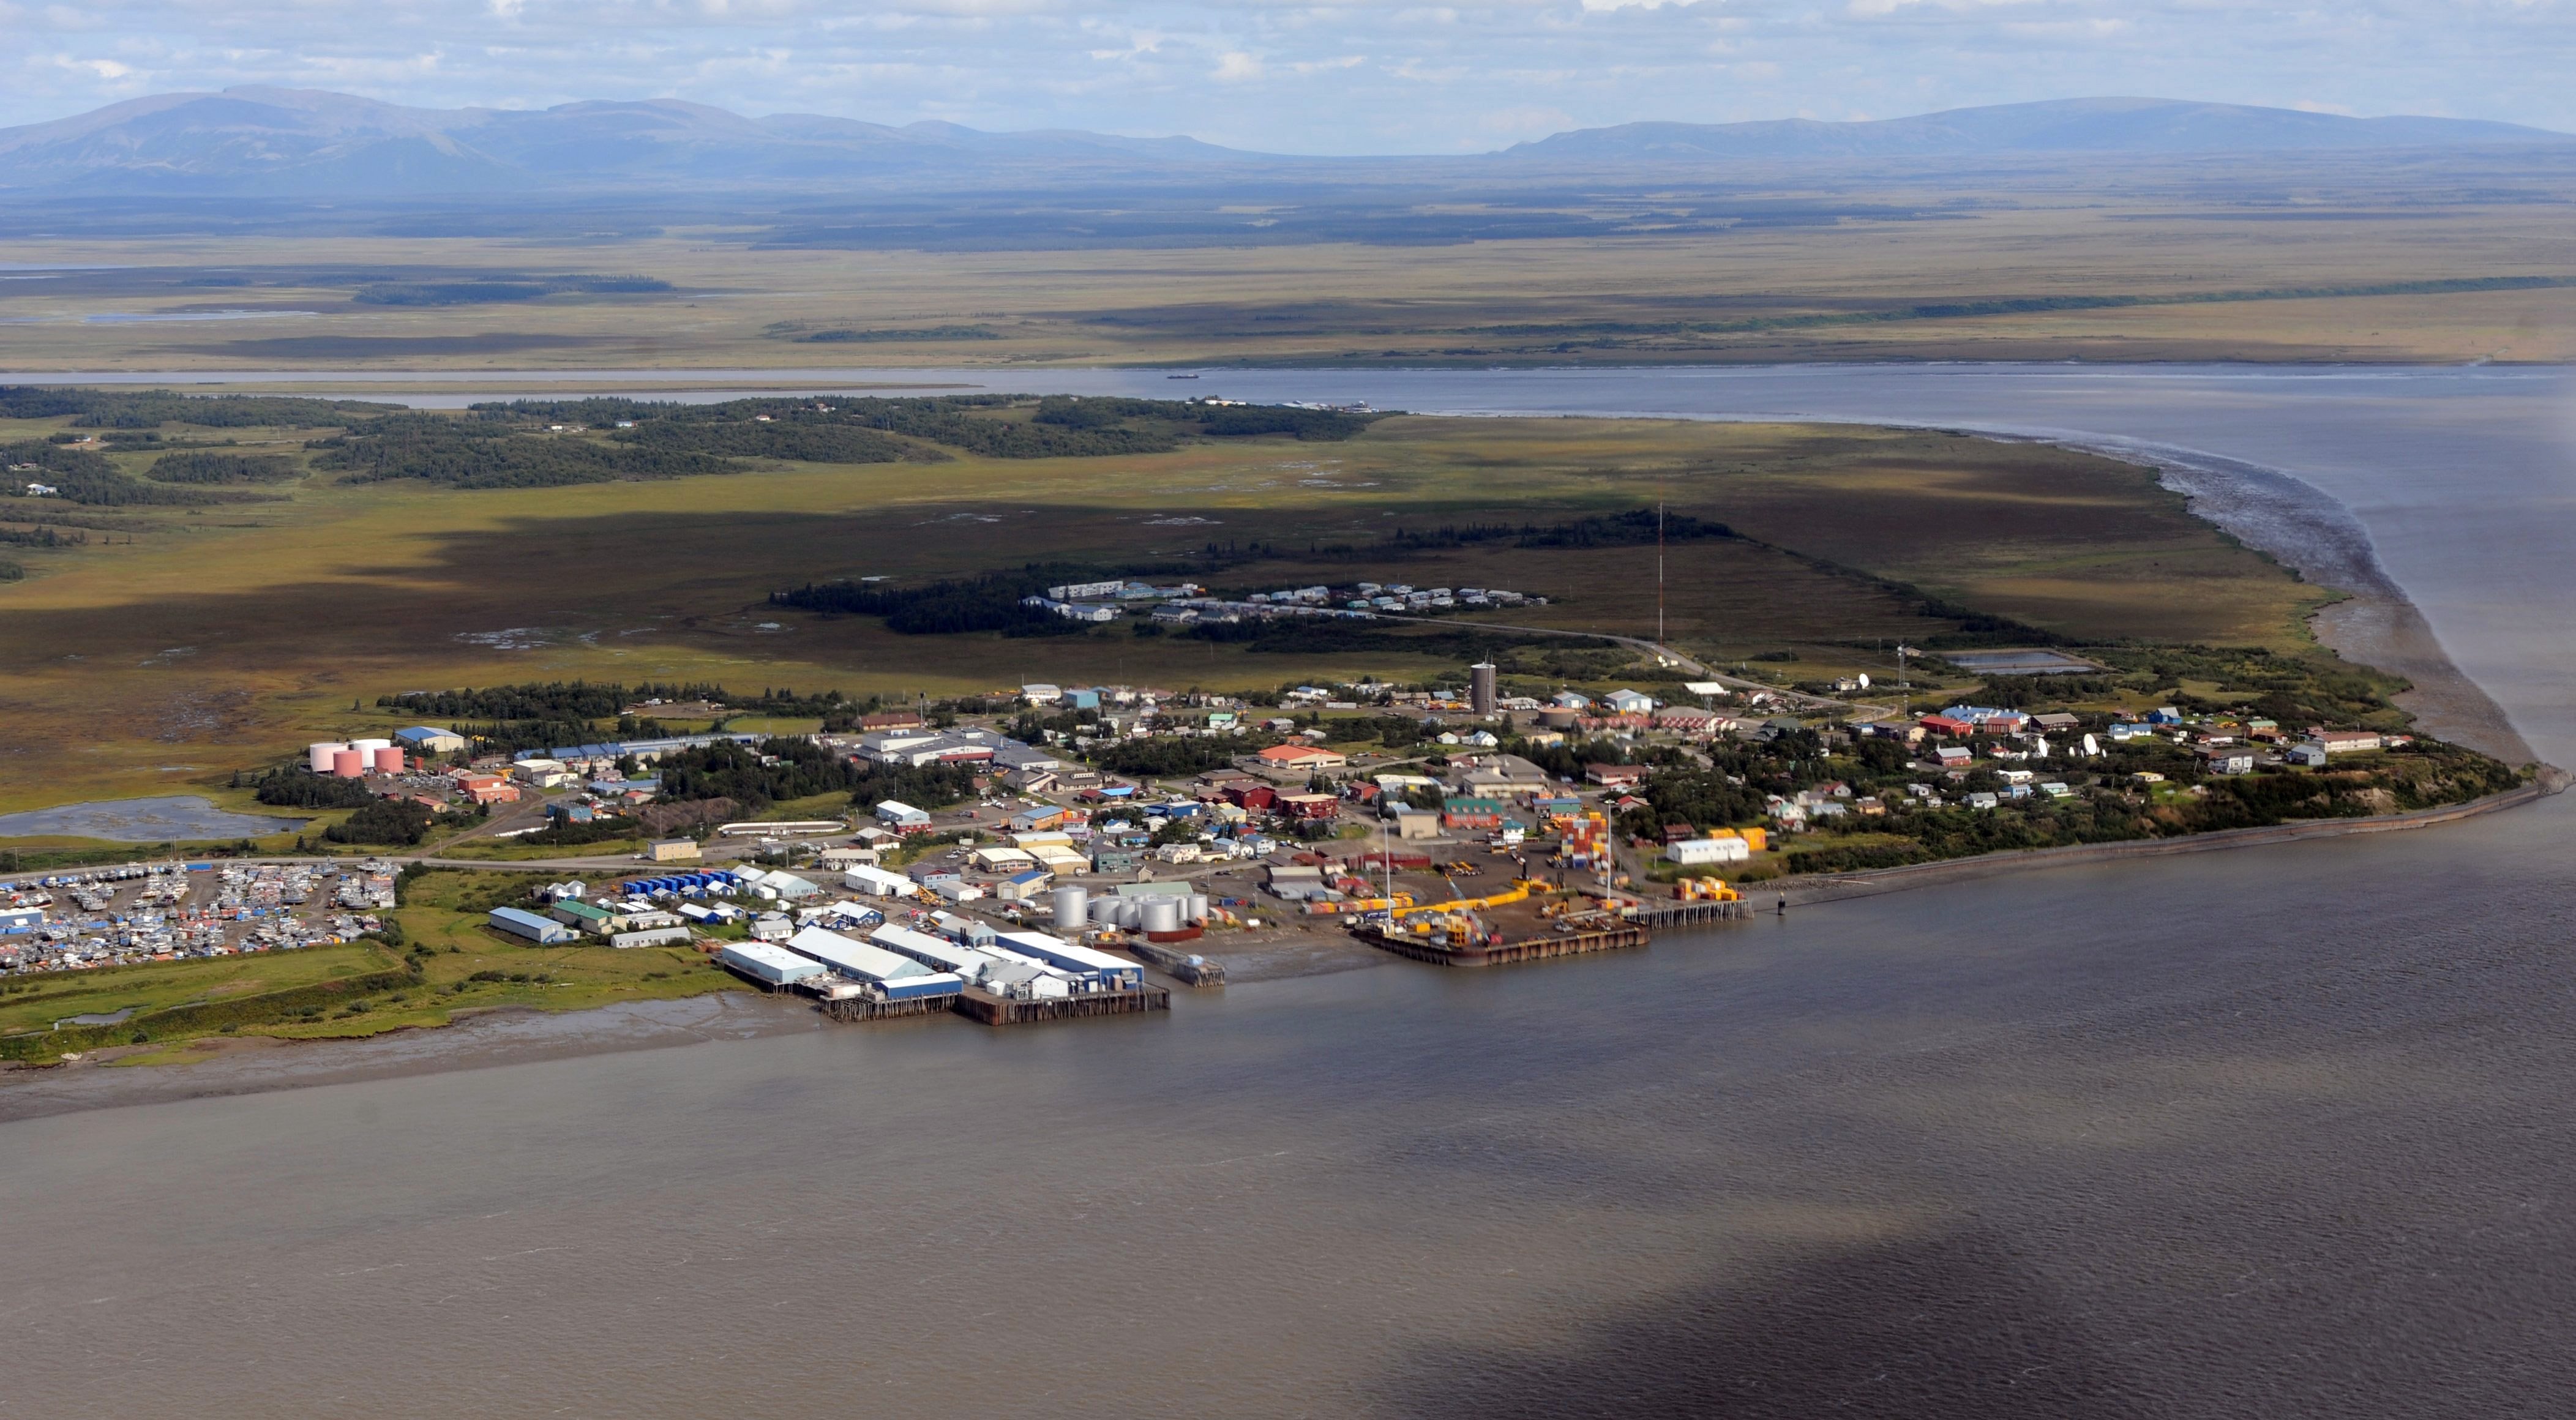 Dillingham, Alaska, a fishing community of 2,300 is the largest town and hub of the Bristol Bay region. (Anchorage Daily News—MCT via Getty Images)